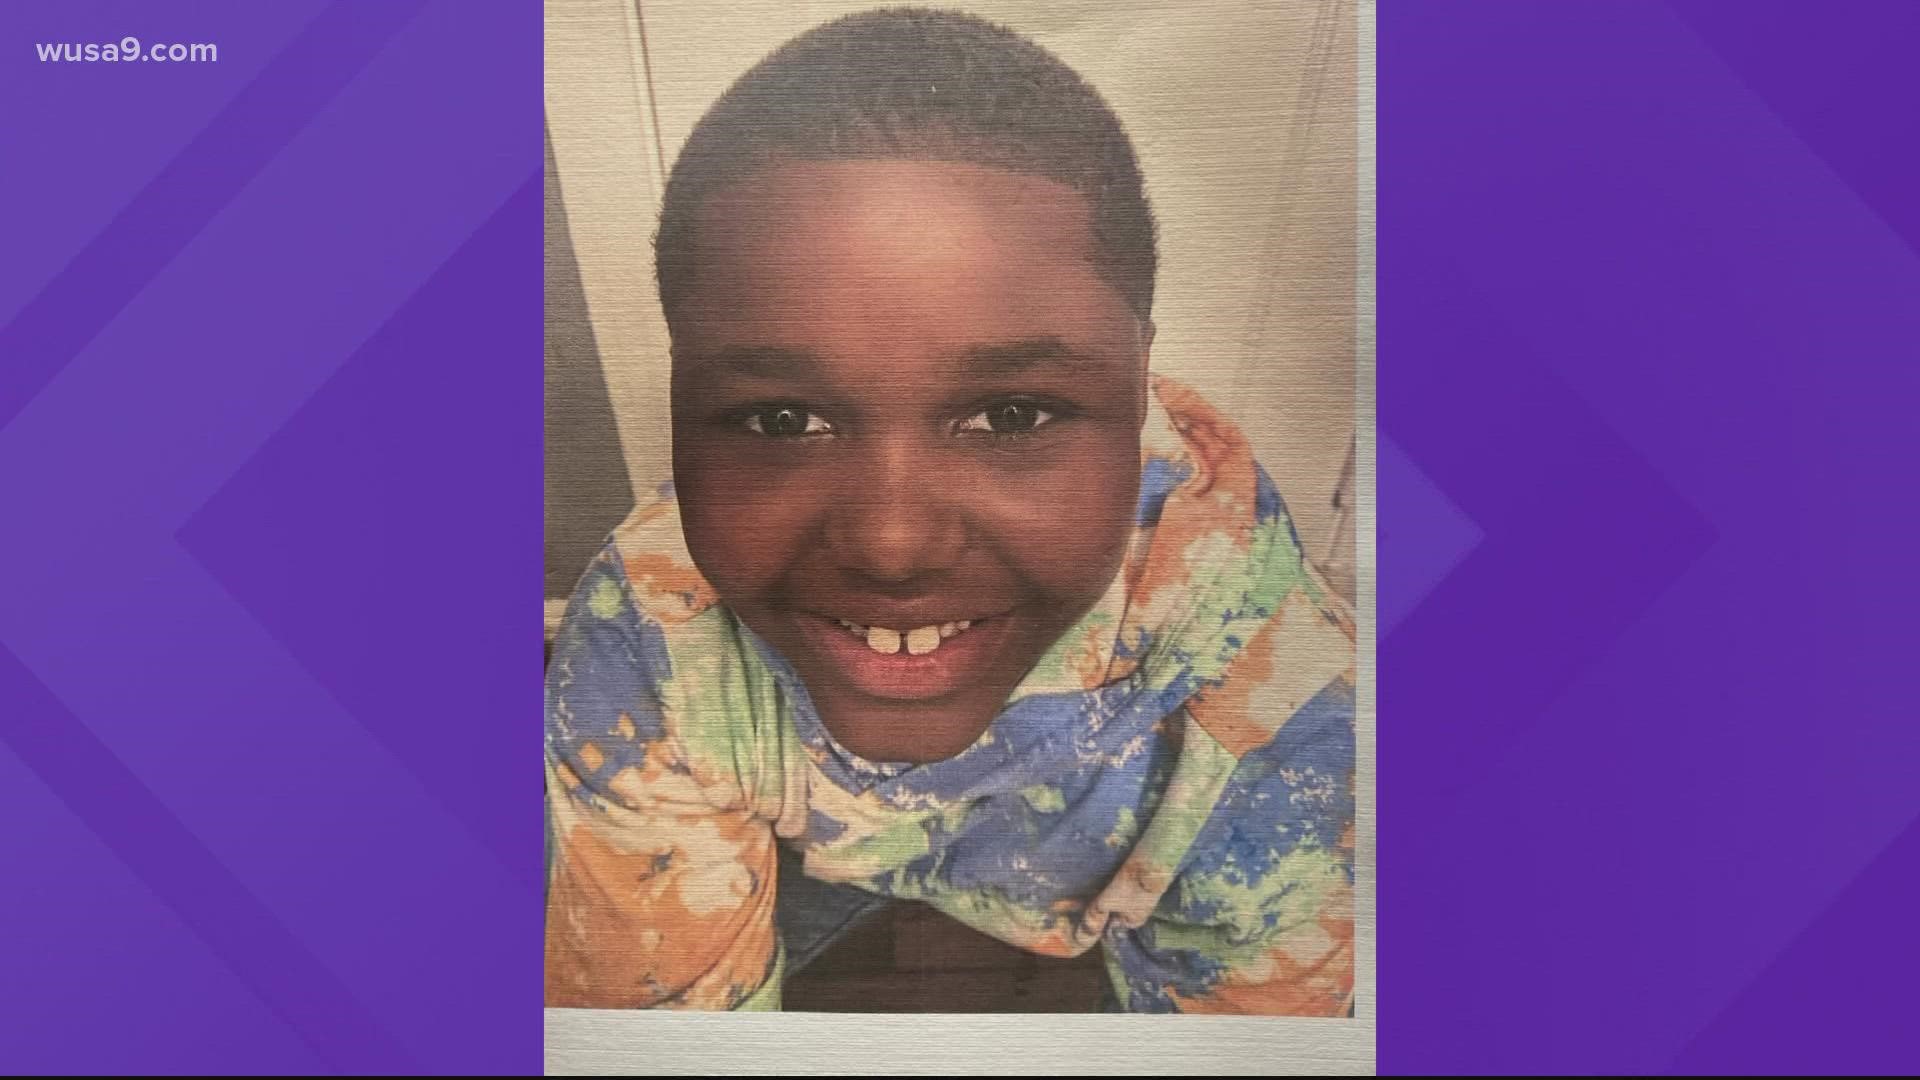 Kaidyn Green from KIPP DC Honor Academy is fighting for his life after being hit by a car Friday, his attorney told WUSA9.